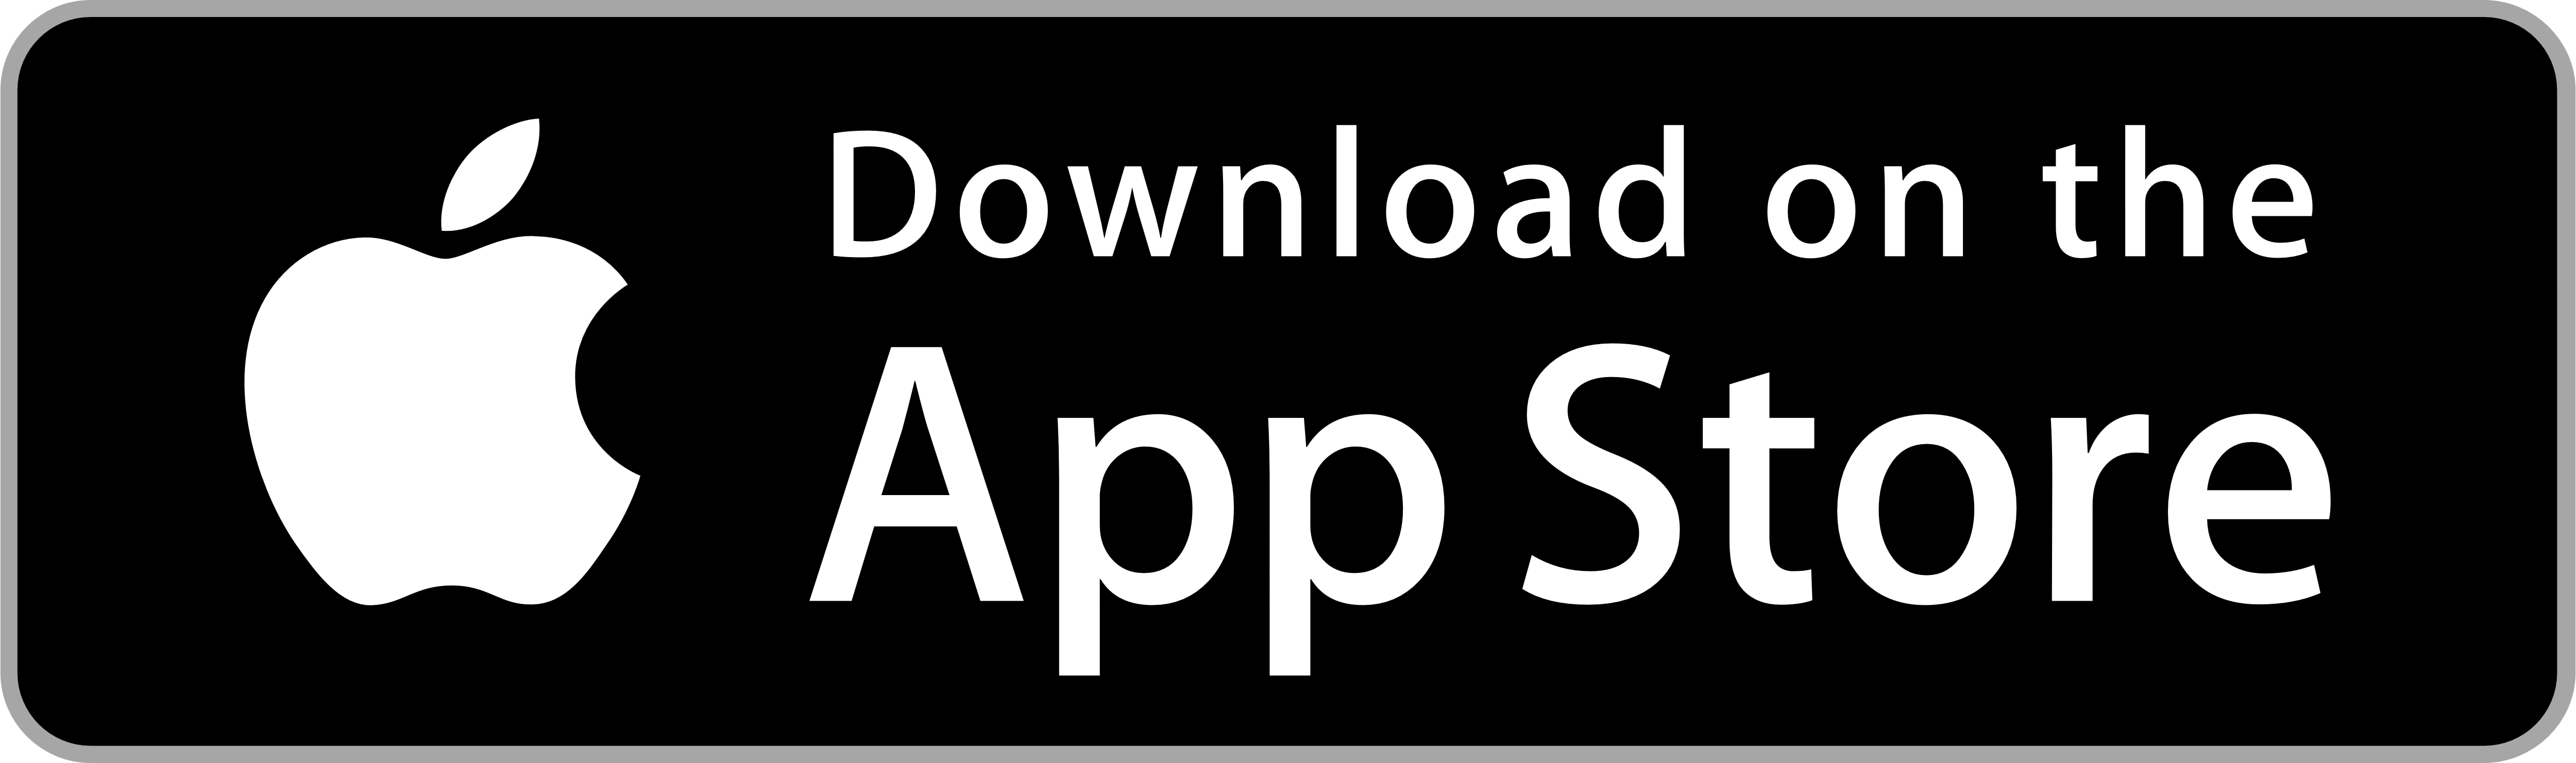 Download_on_the_App_Store_logo